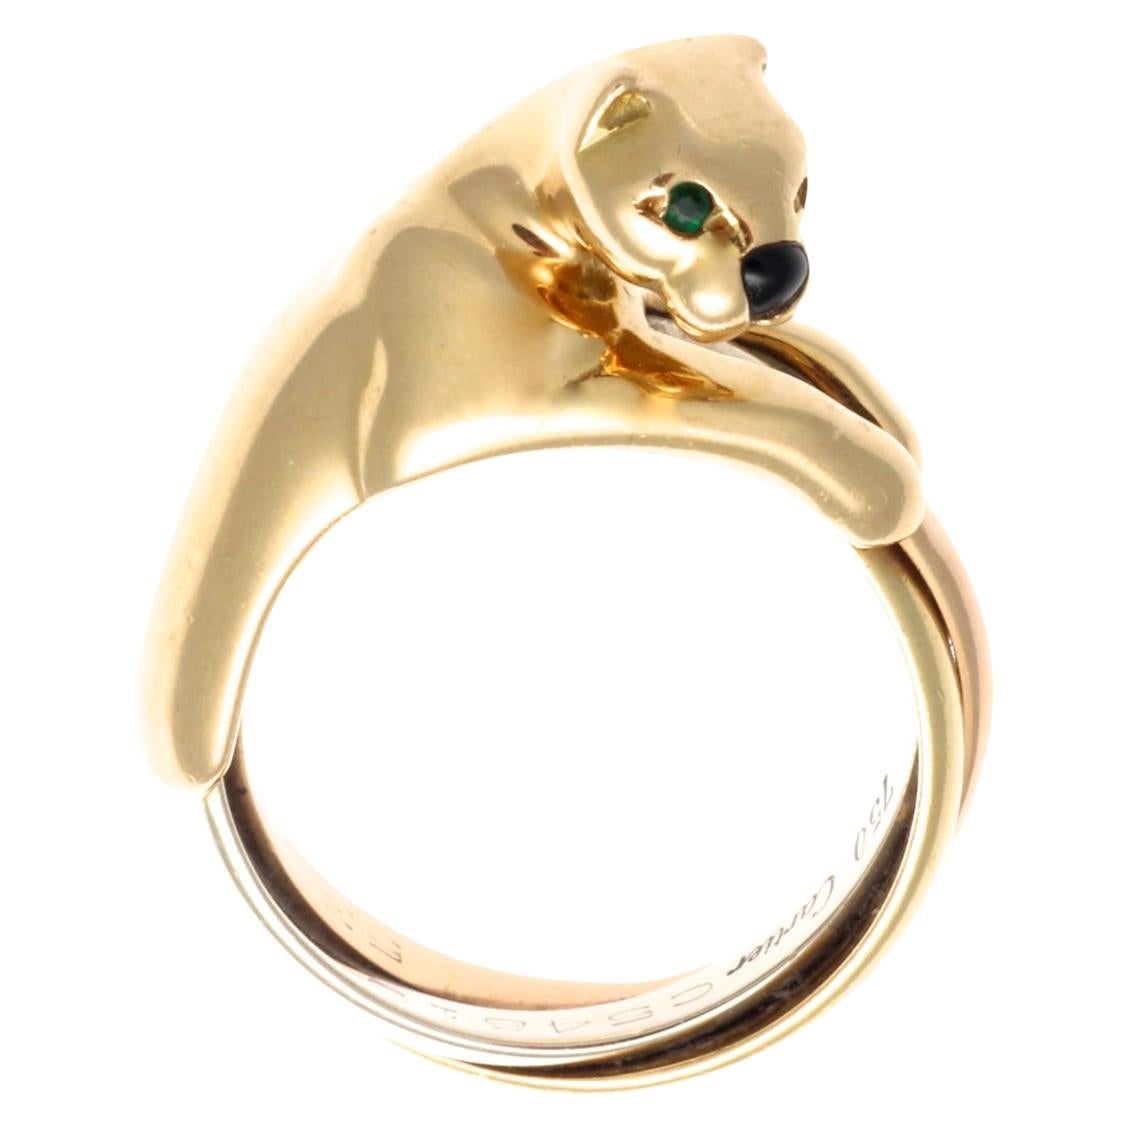 Cartier Panthere Emerald Onyx Tricolor Gold Ring